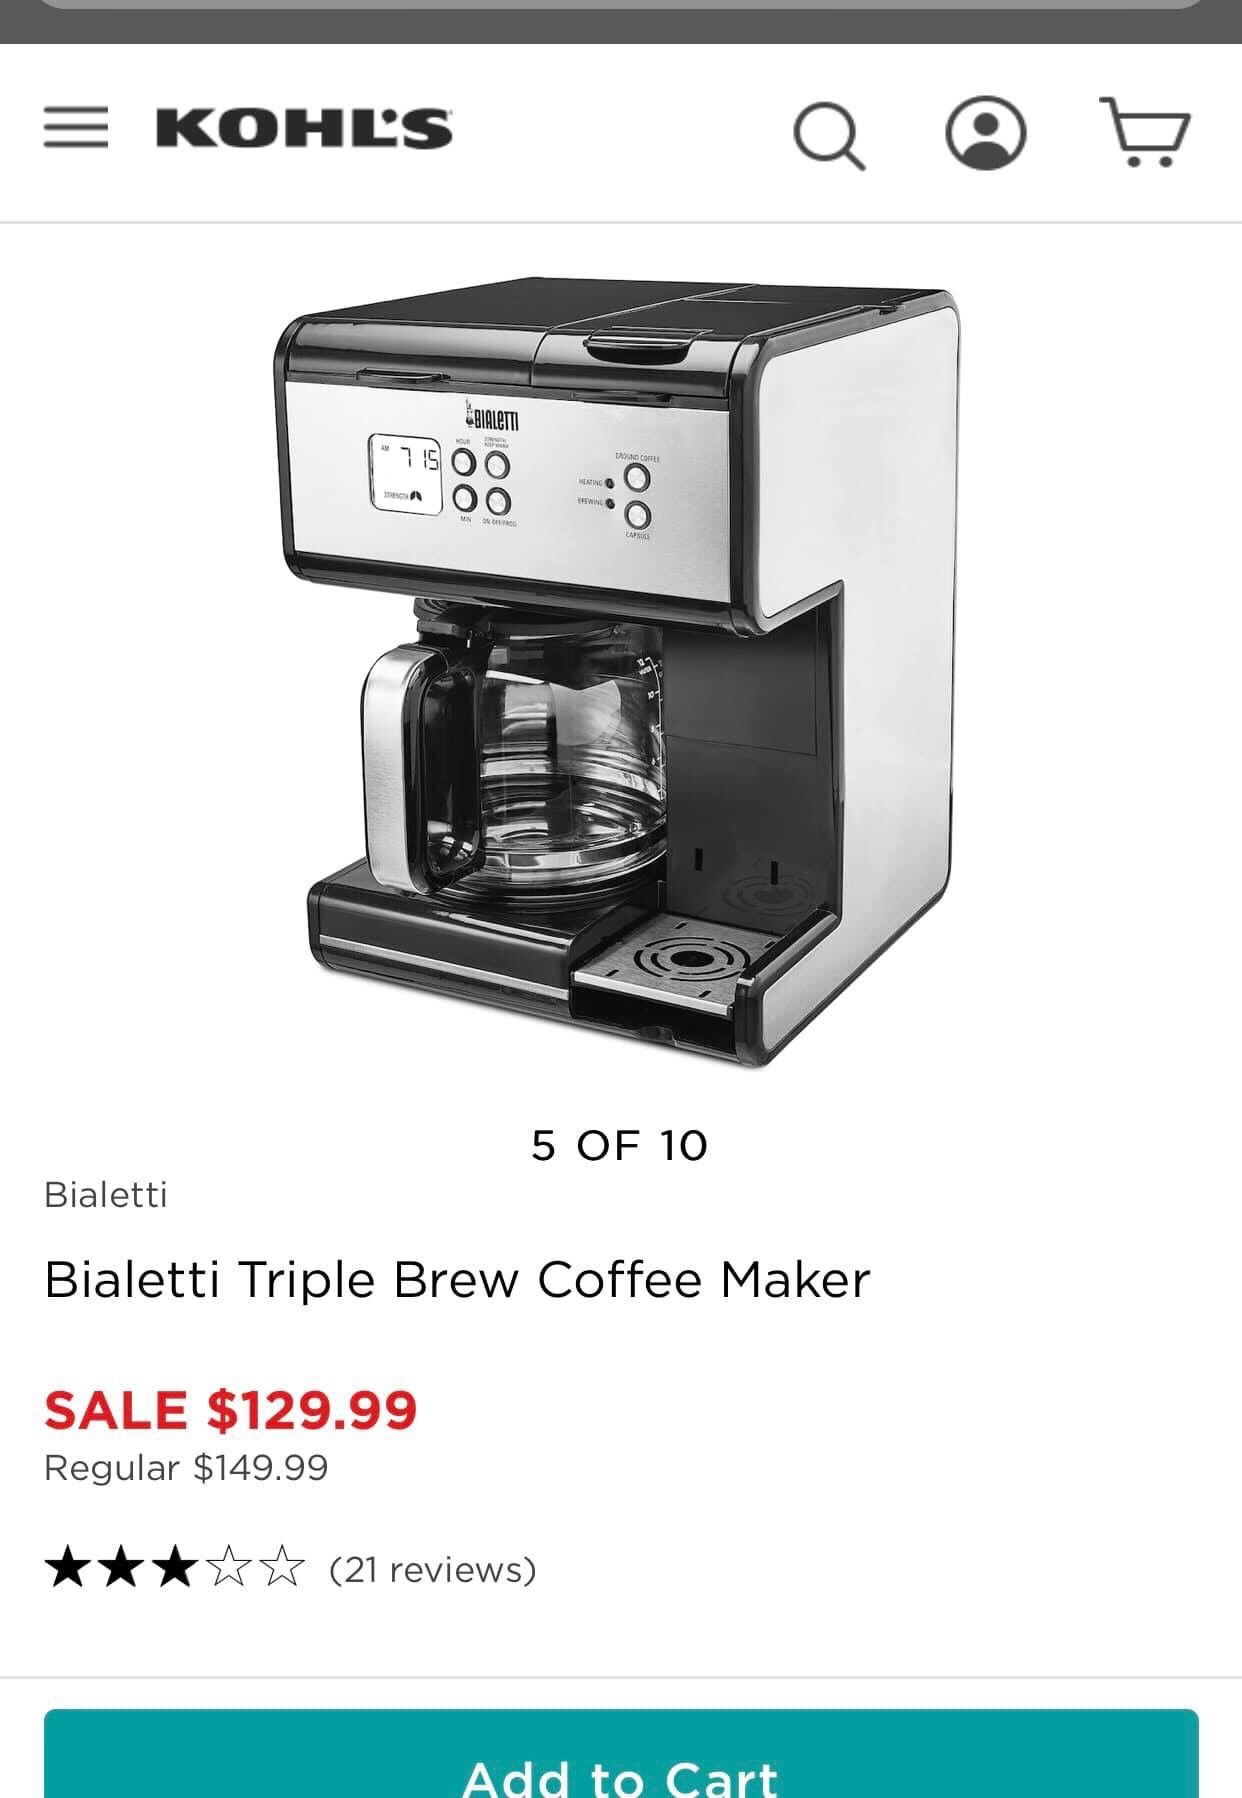 Coffe maker $50 and fountain $80